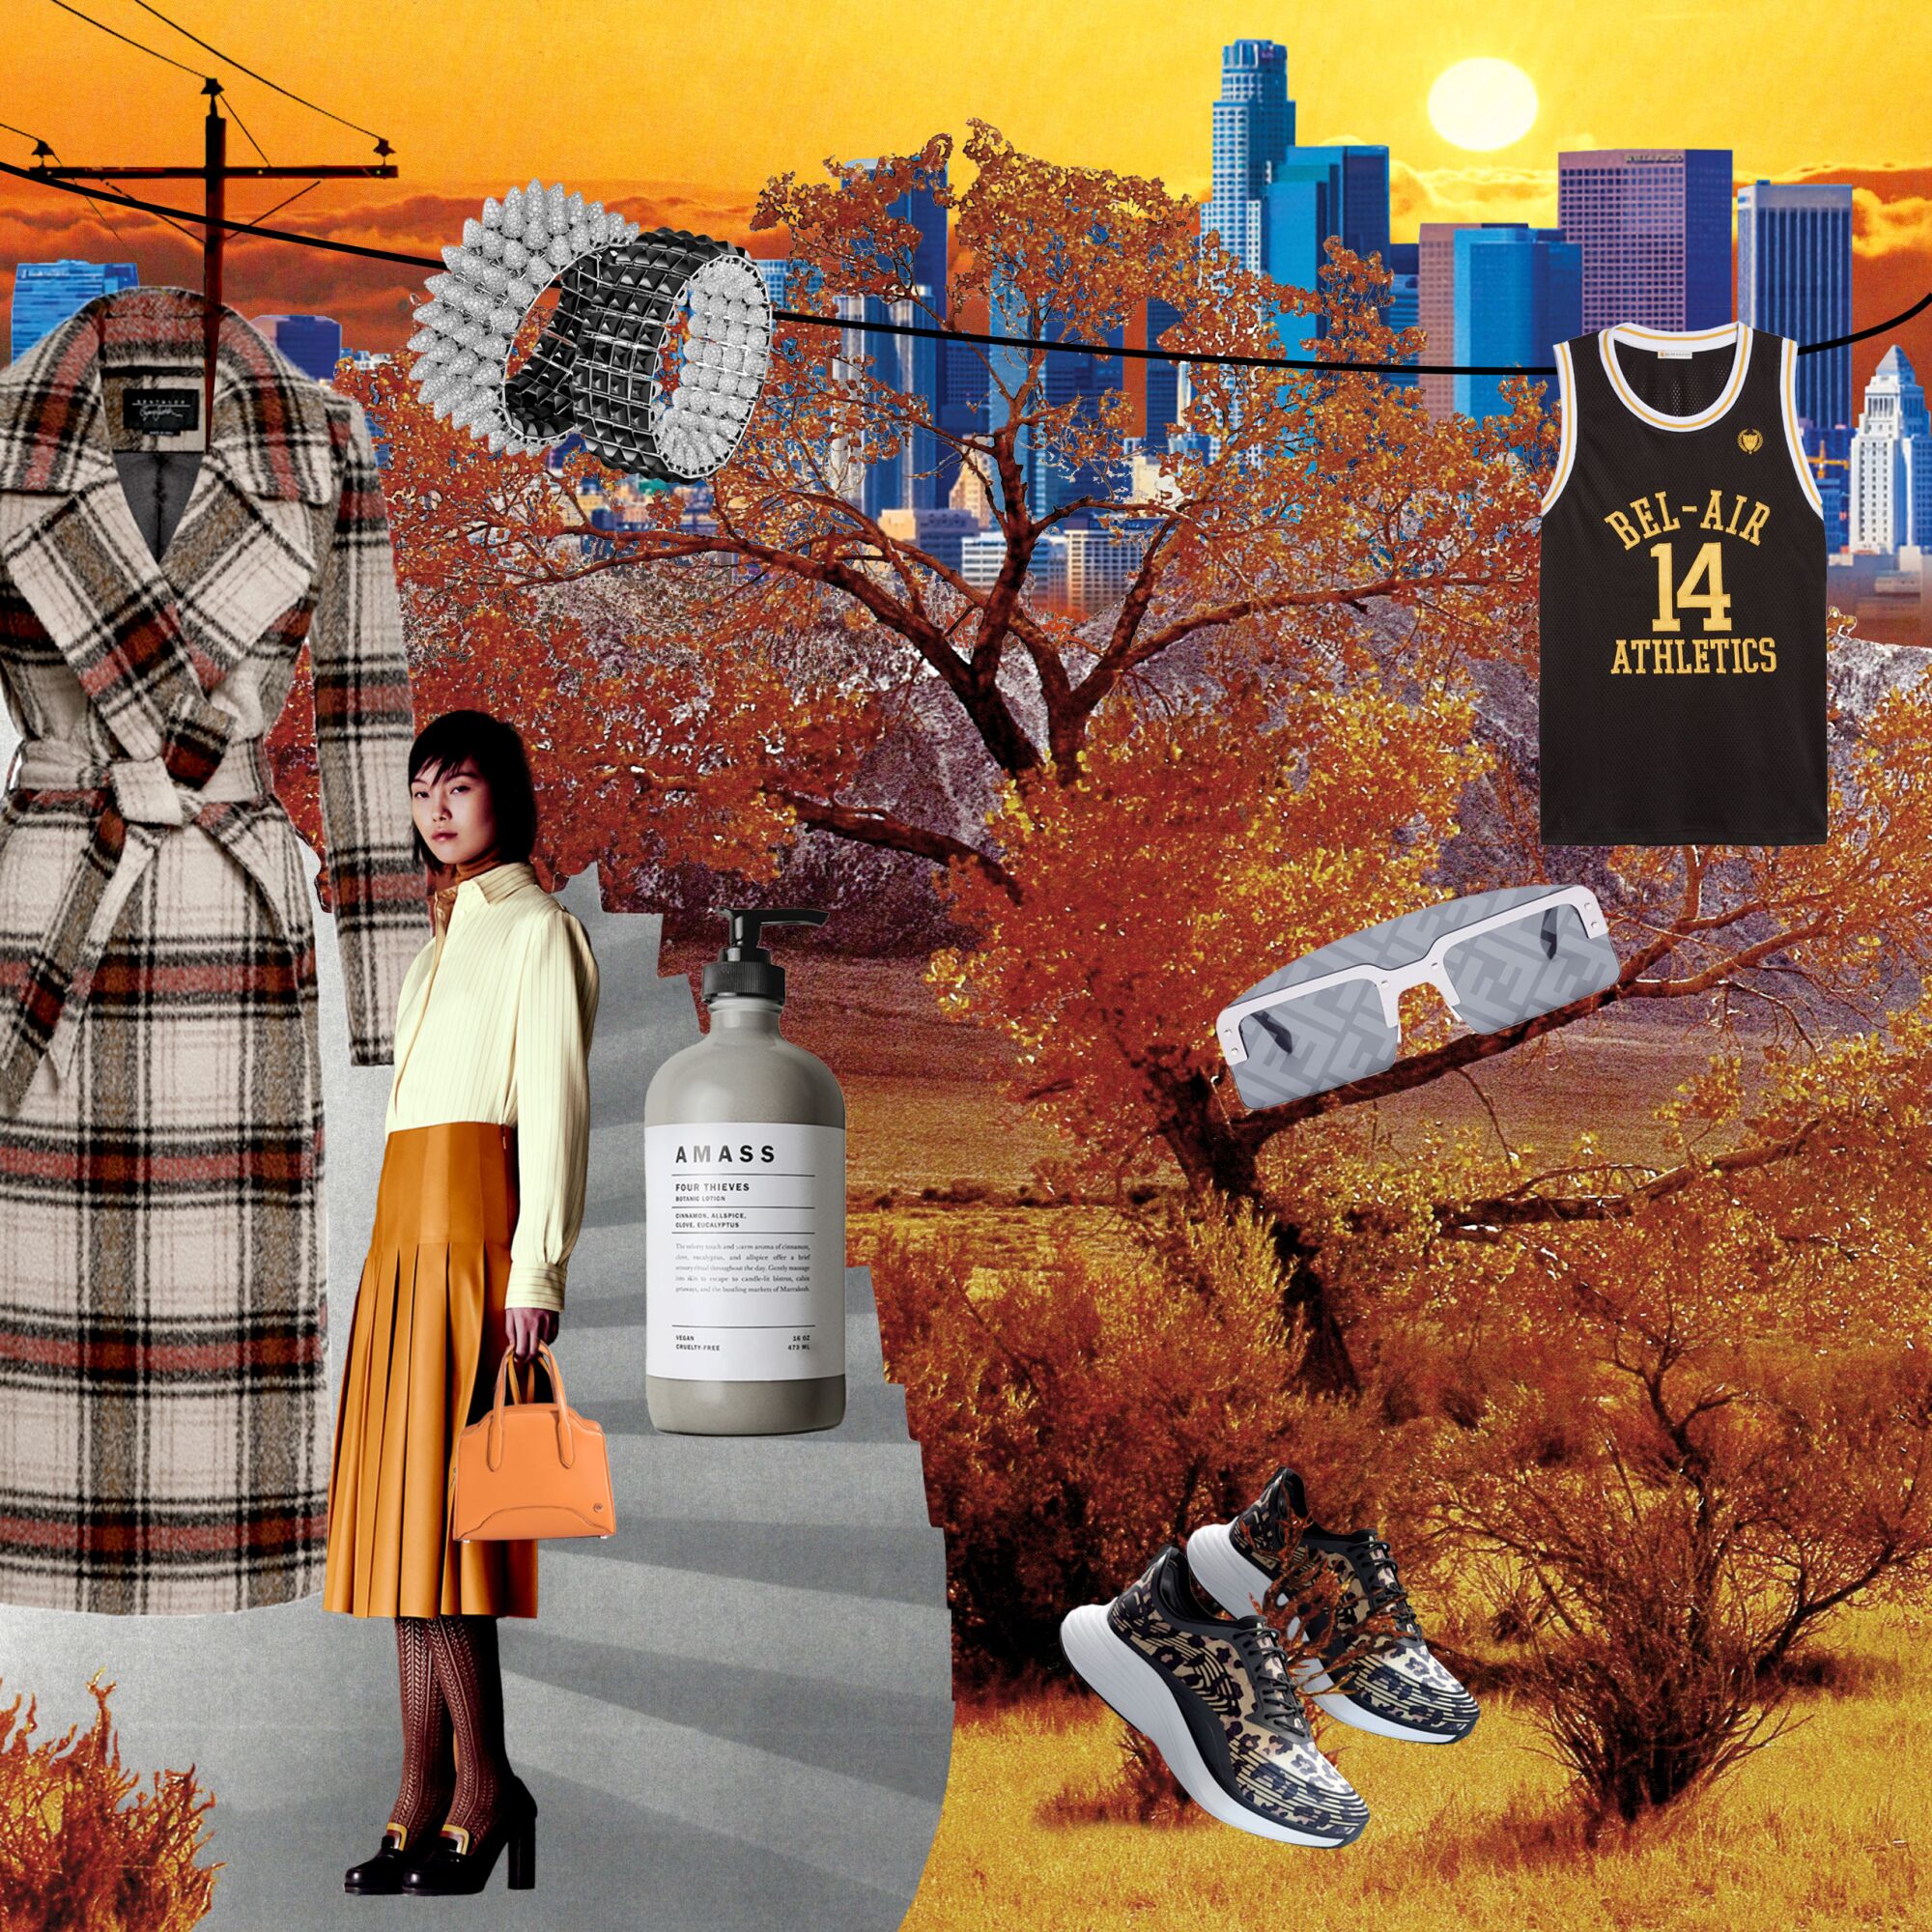 Collage of a woman, shoes, apparel